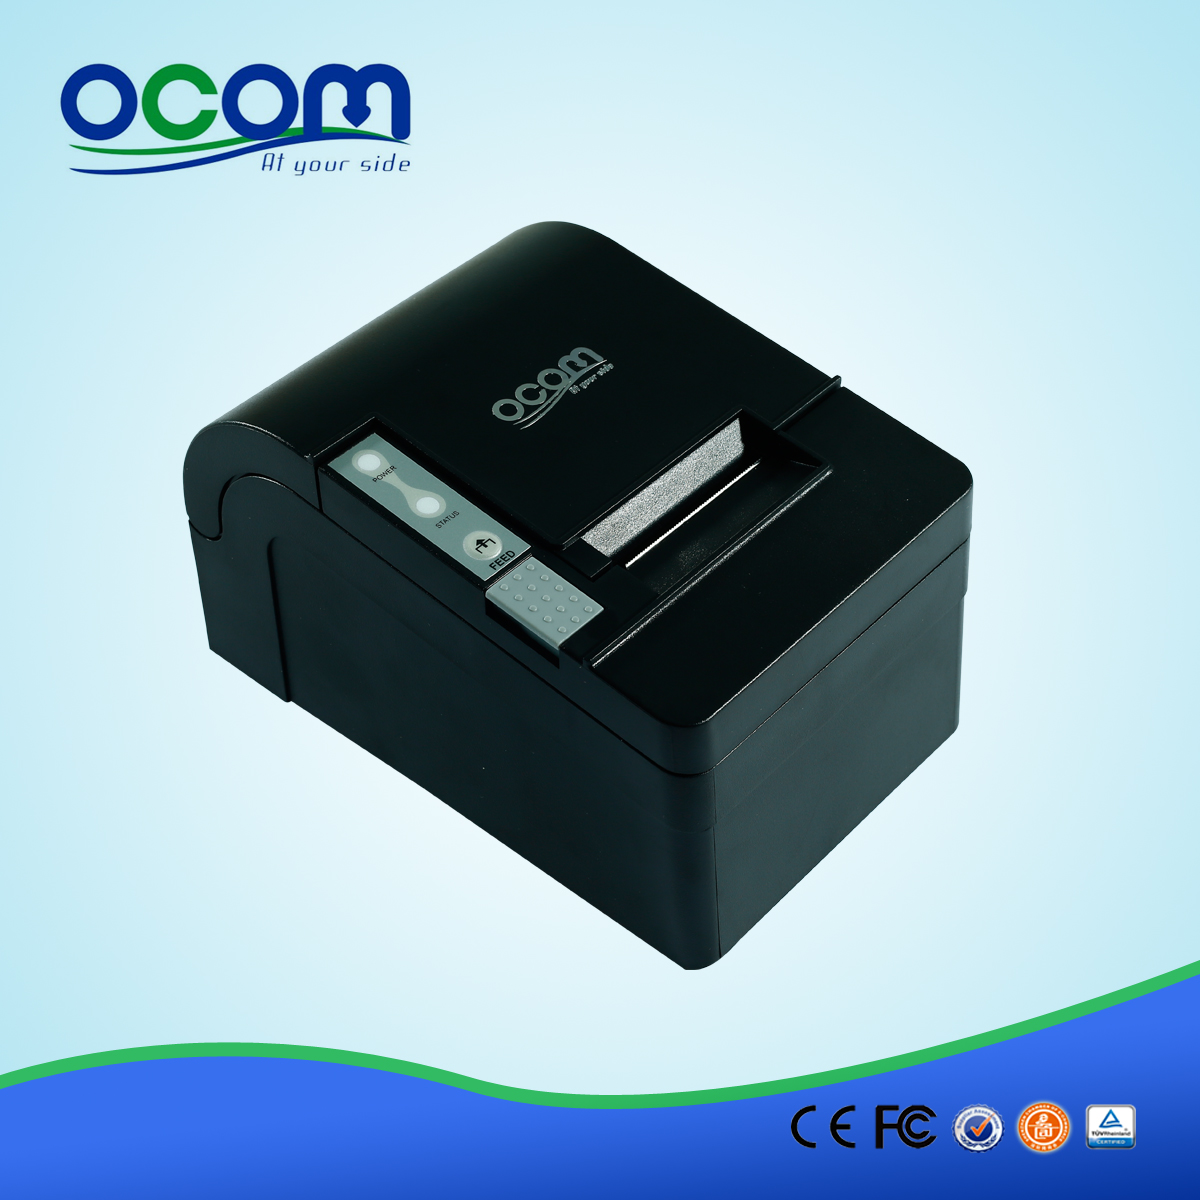 58mm Thermal Printer Android ,with auto cutter  OCPP-58C